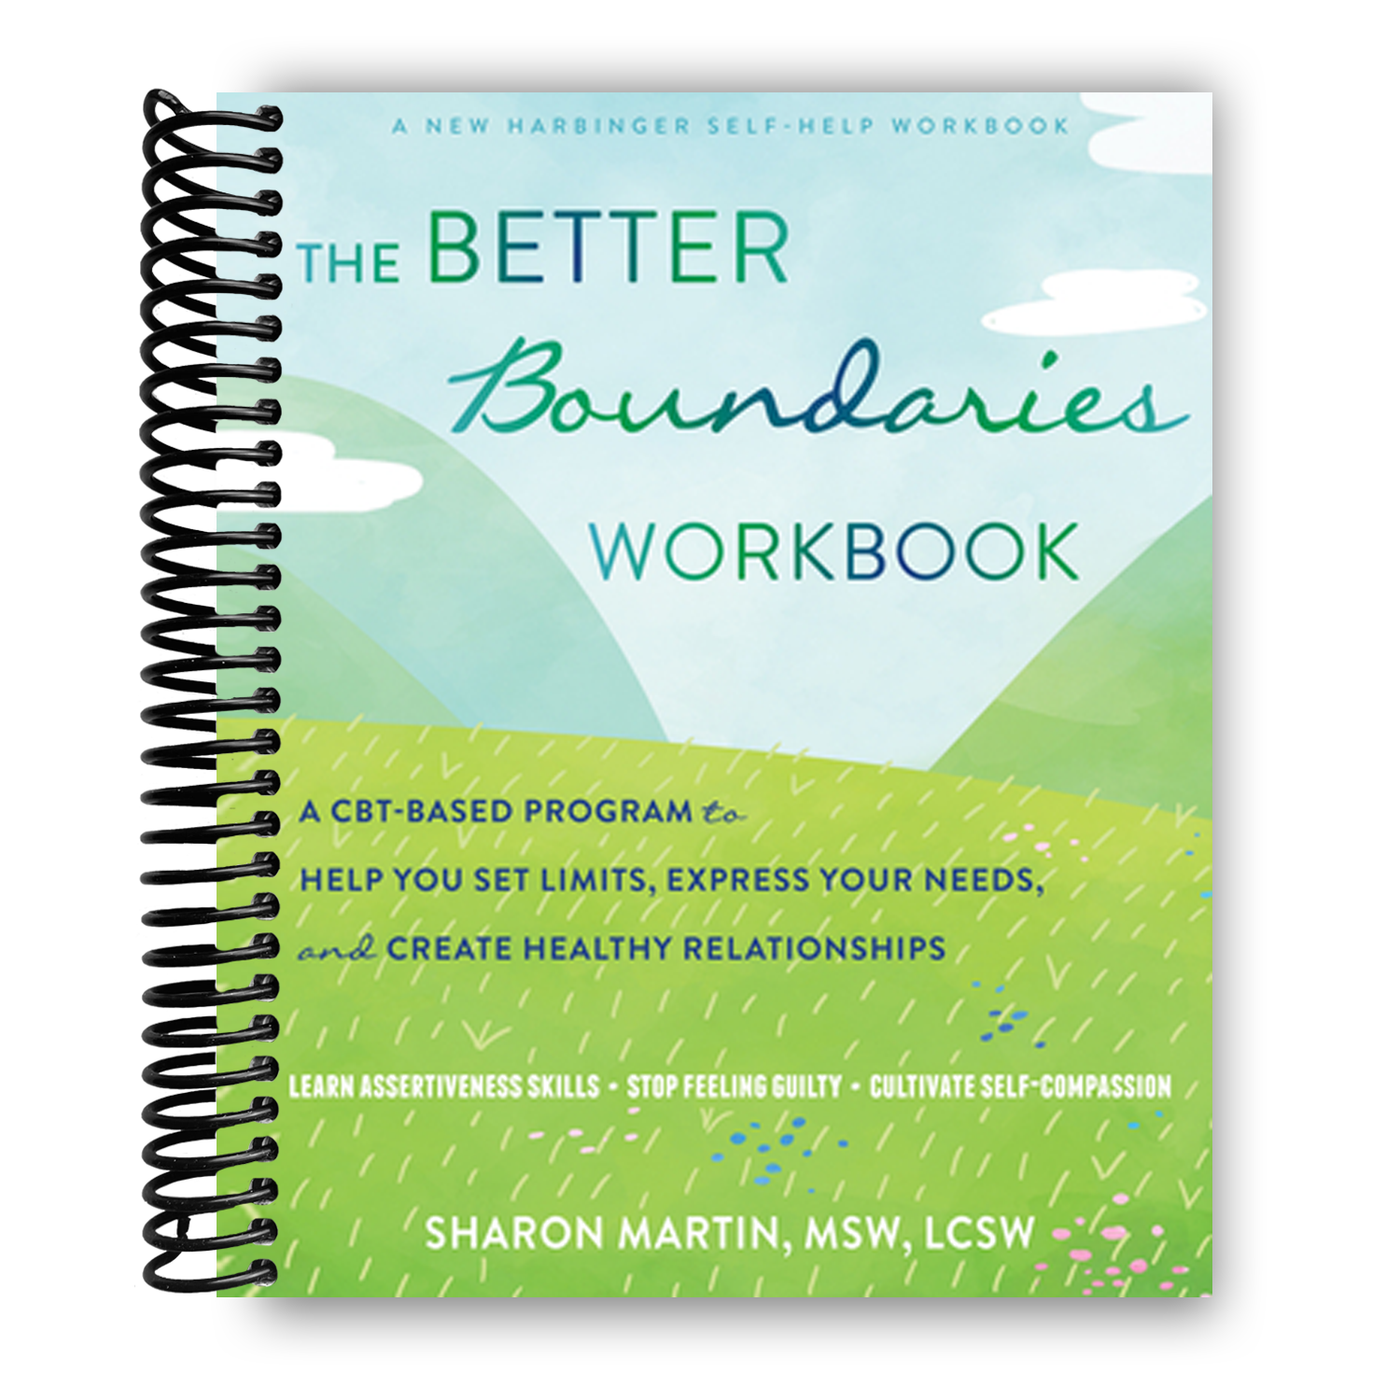 The Better Boundaries Workbook: A CBT-Based Program to Help You Set Limits, Express Your Needs, and Create Healthy Relationships(Spiral Bound)